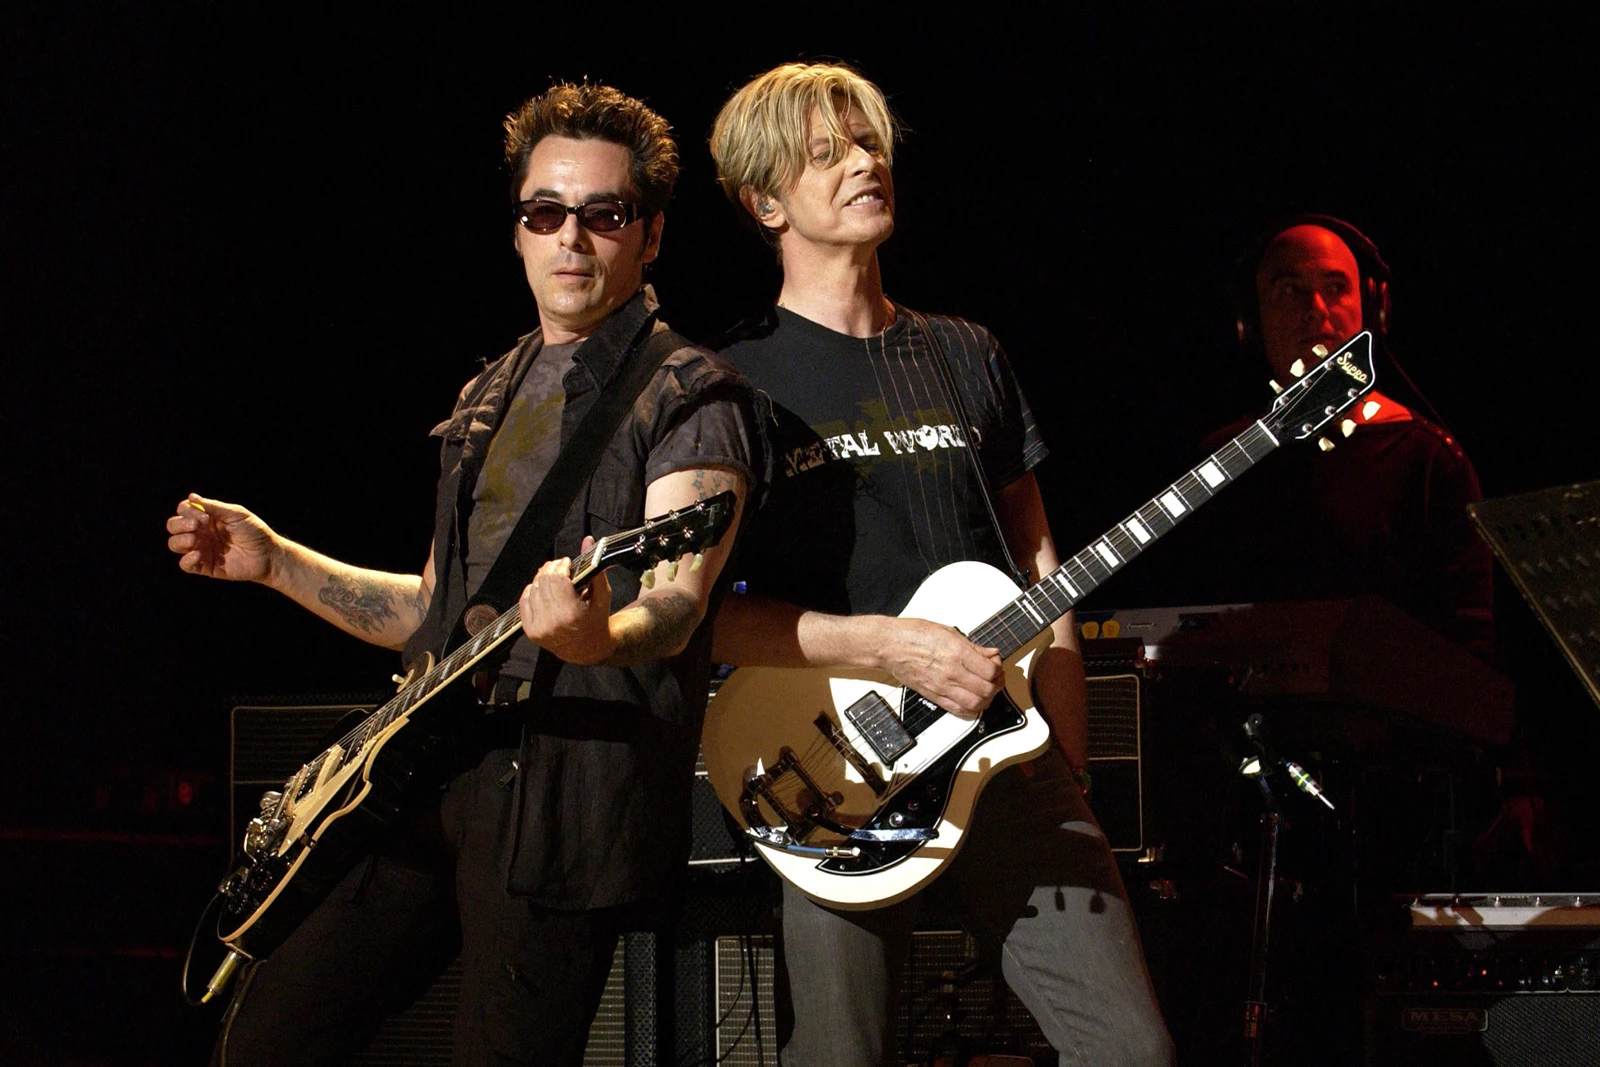 Did Earl Slick Have to Blow Up a Car for David Bowie Reunion?